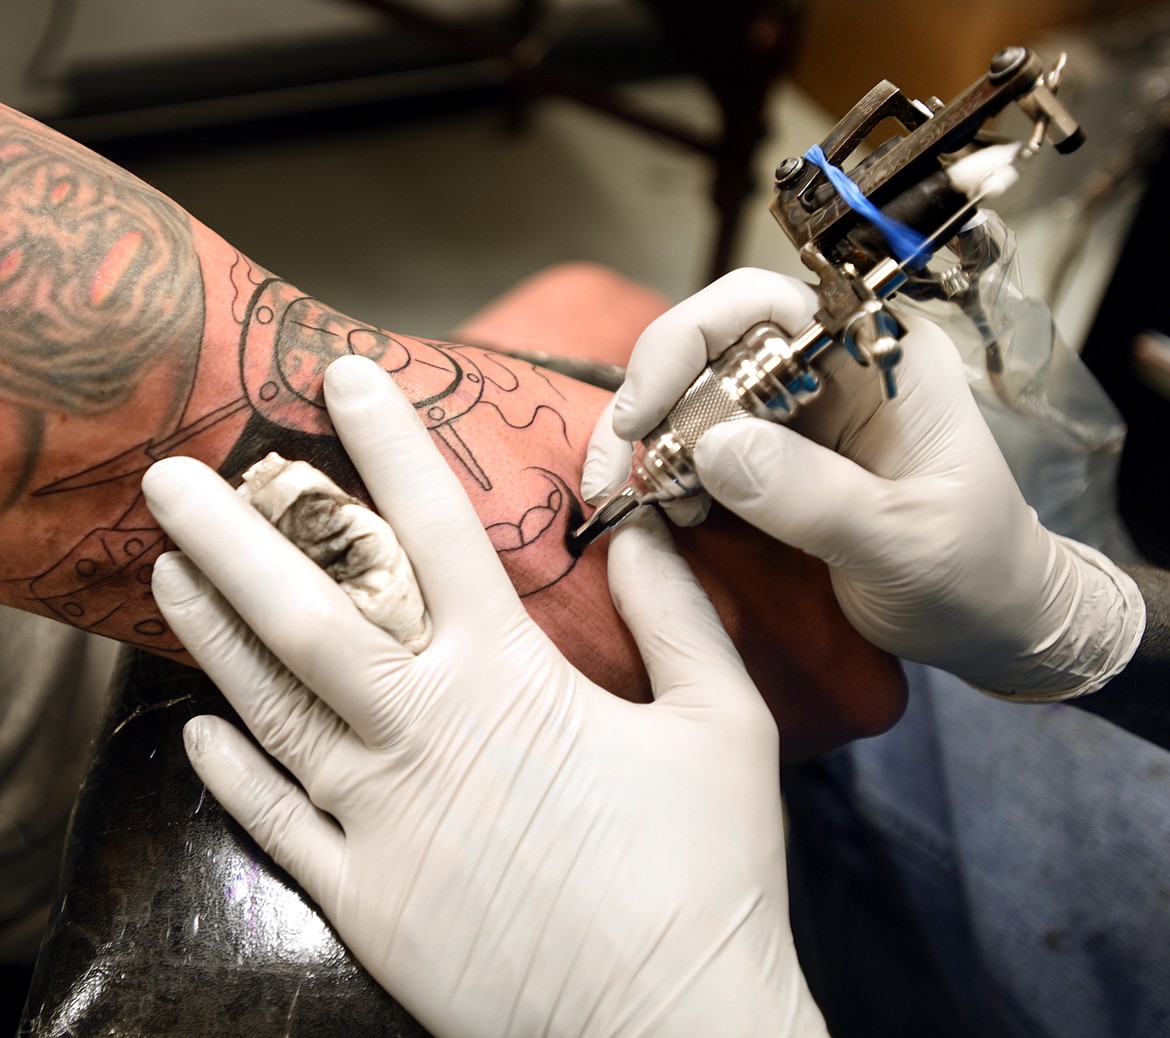 Vote Which Tattoo Artist You Think Should Be Named West MIs Fav